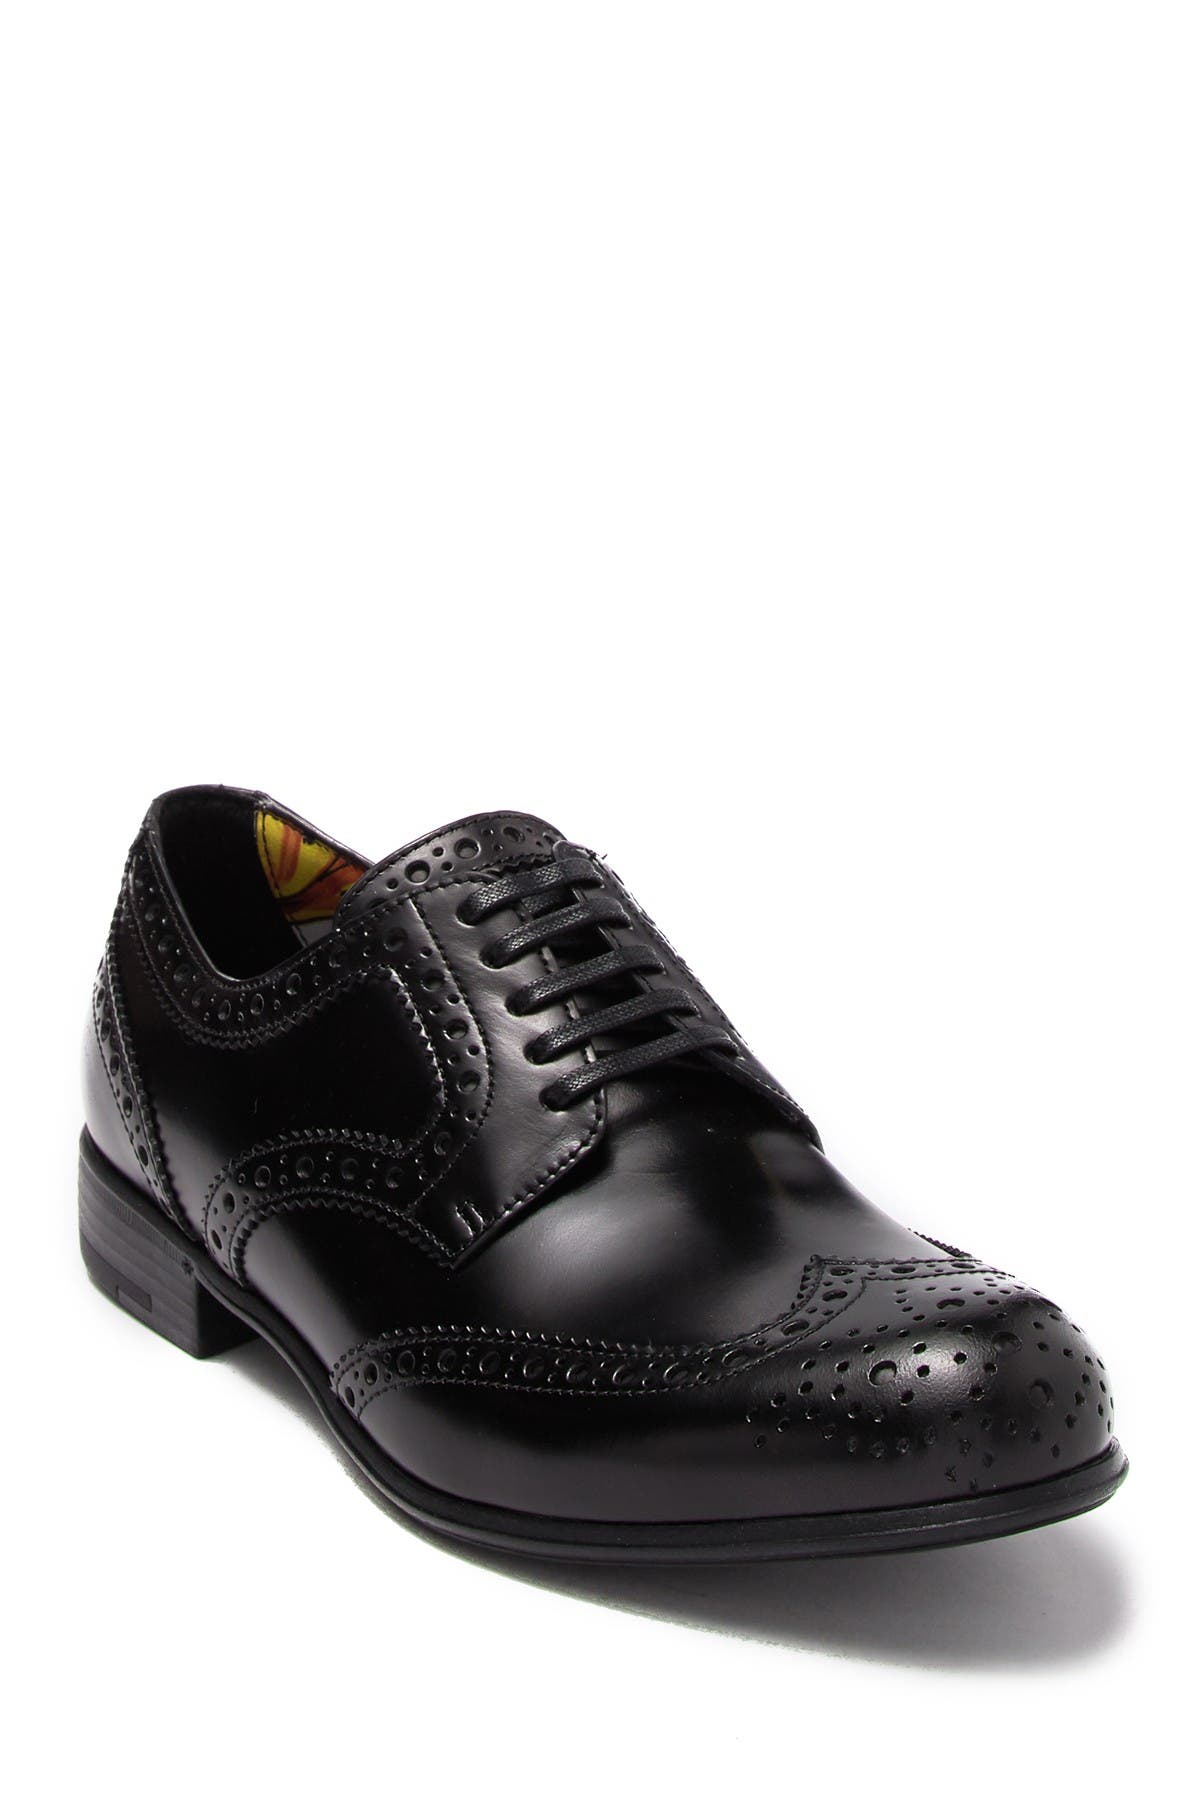 dolce and gabbana shoes nordstrom